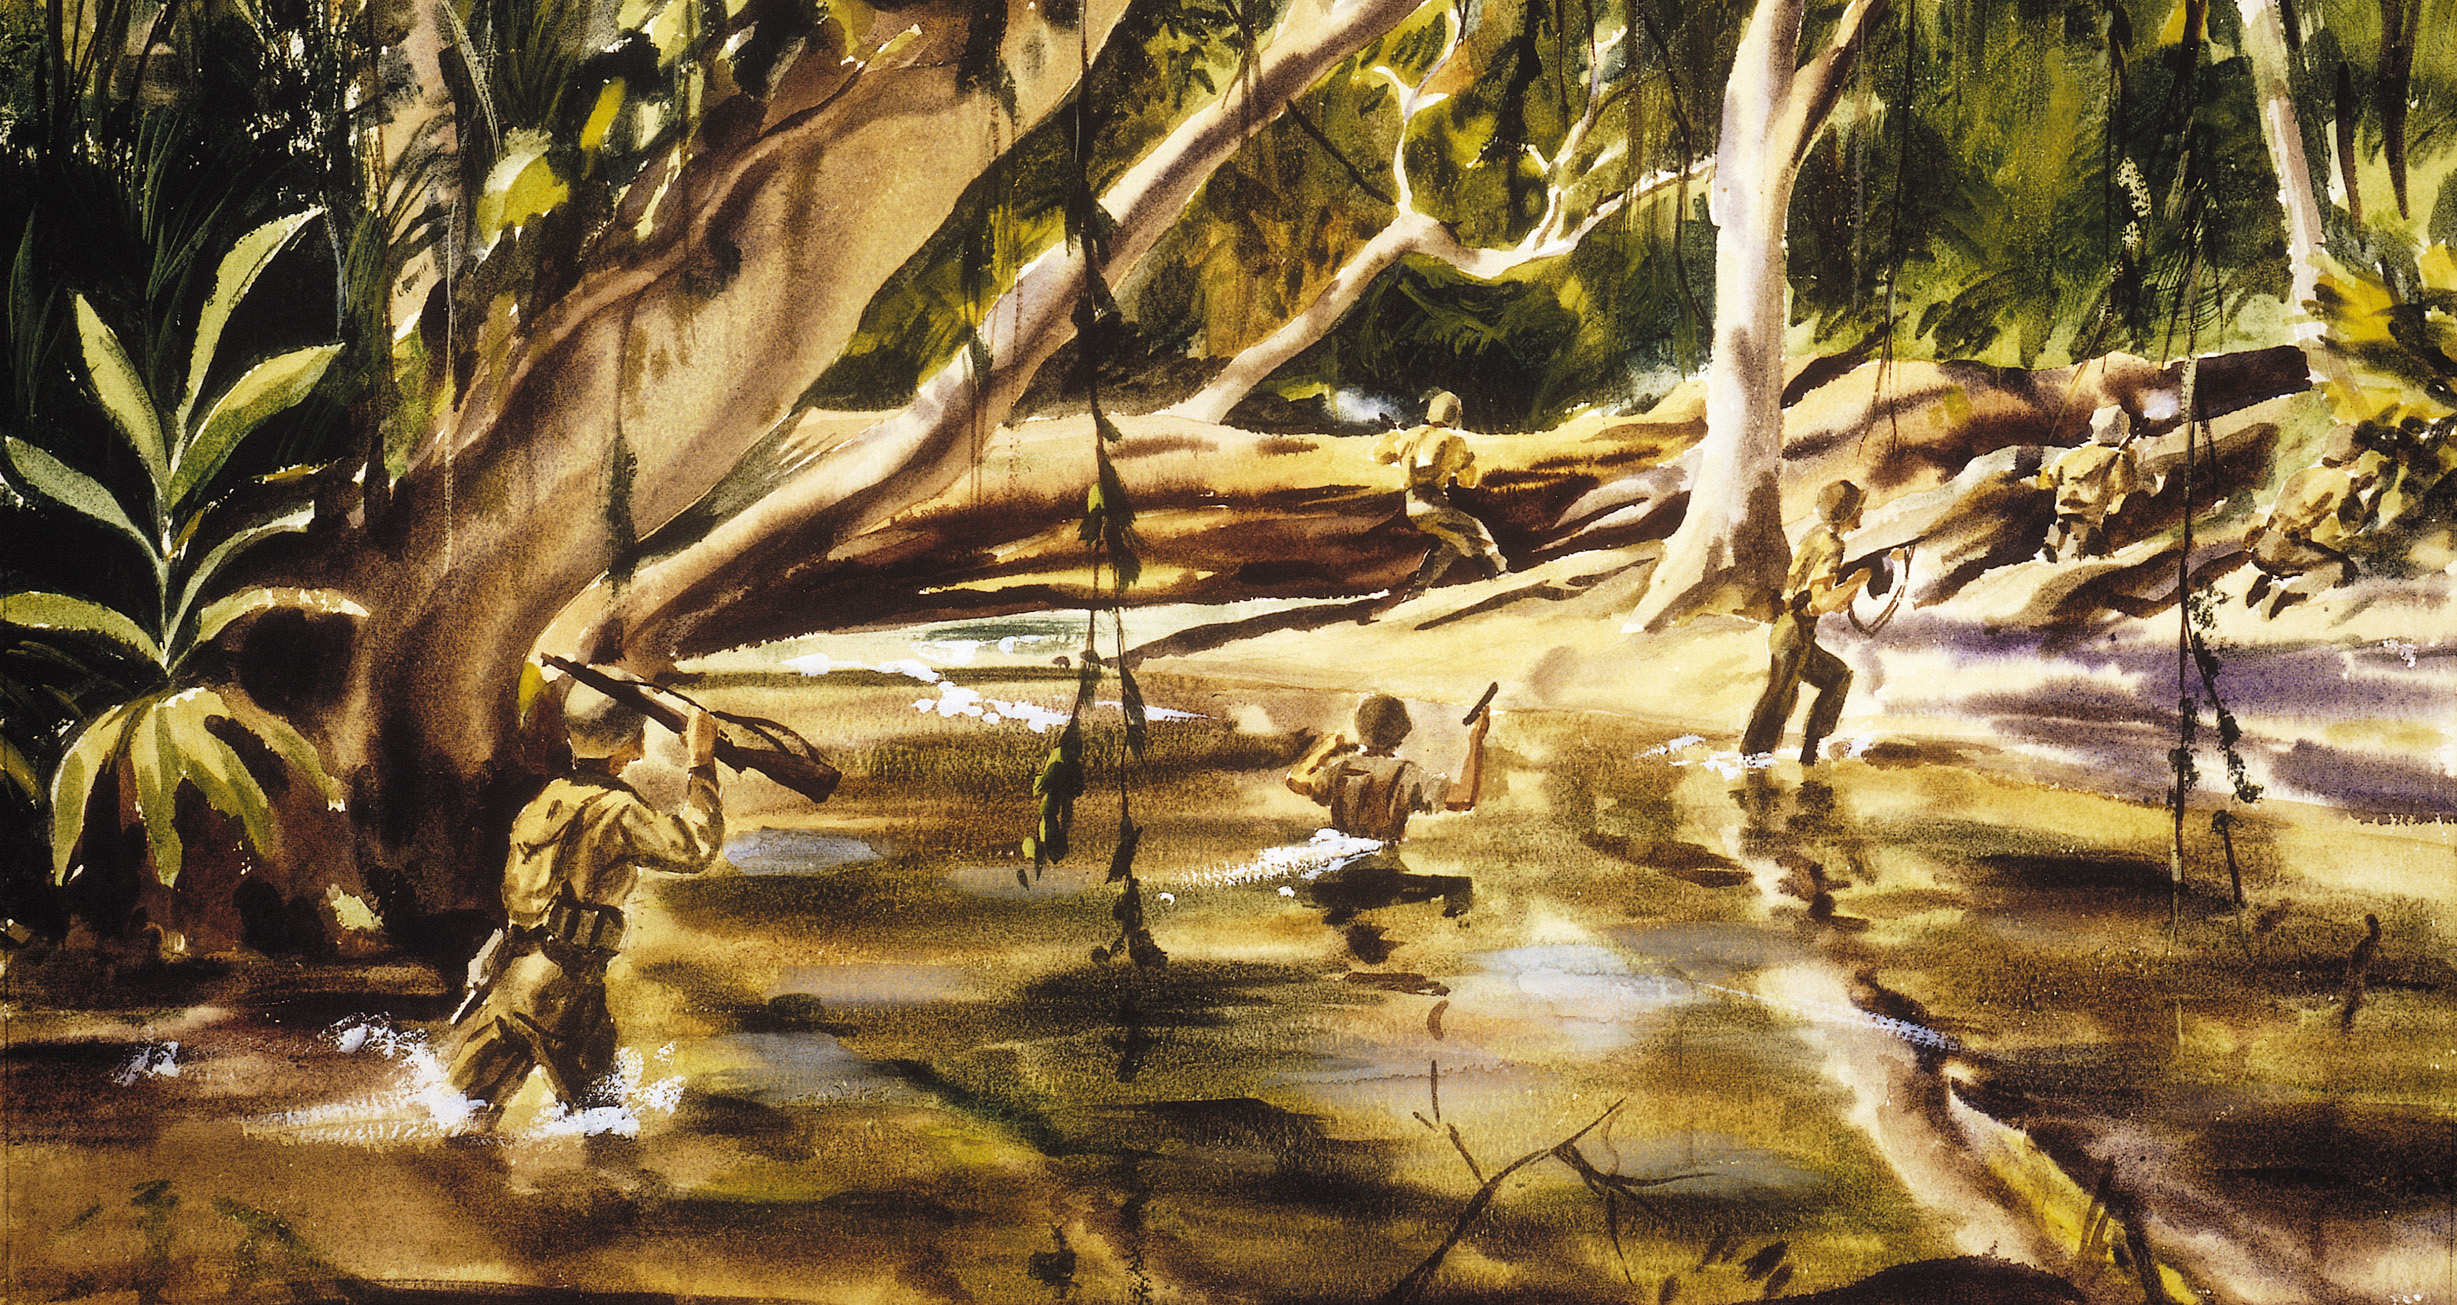 American soldiers ford one of Guadalcanal’s numerous streams in Action on the River by Dwight Shepler. In the Solomons, U.S. troops battled both a determined enemy in the Japanese and the harsh tropical climate of the South Pacific. Guadalcanal was the first offensive land operation undertaken by American forces in the Pacific Theater. The island was secured after seven months of fighting.